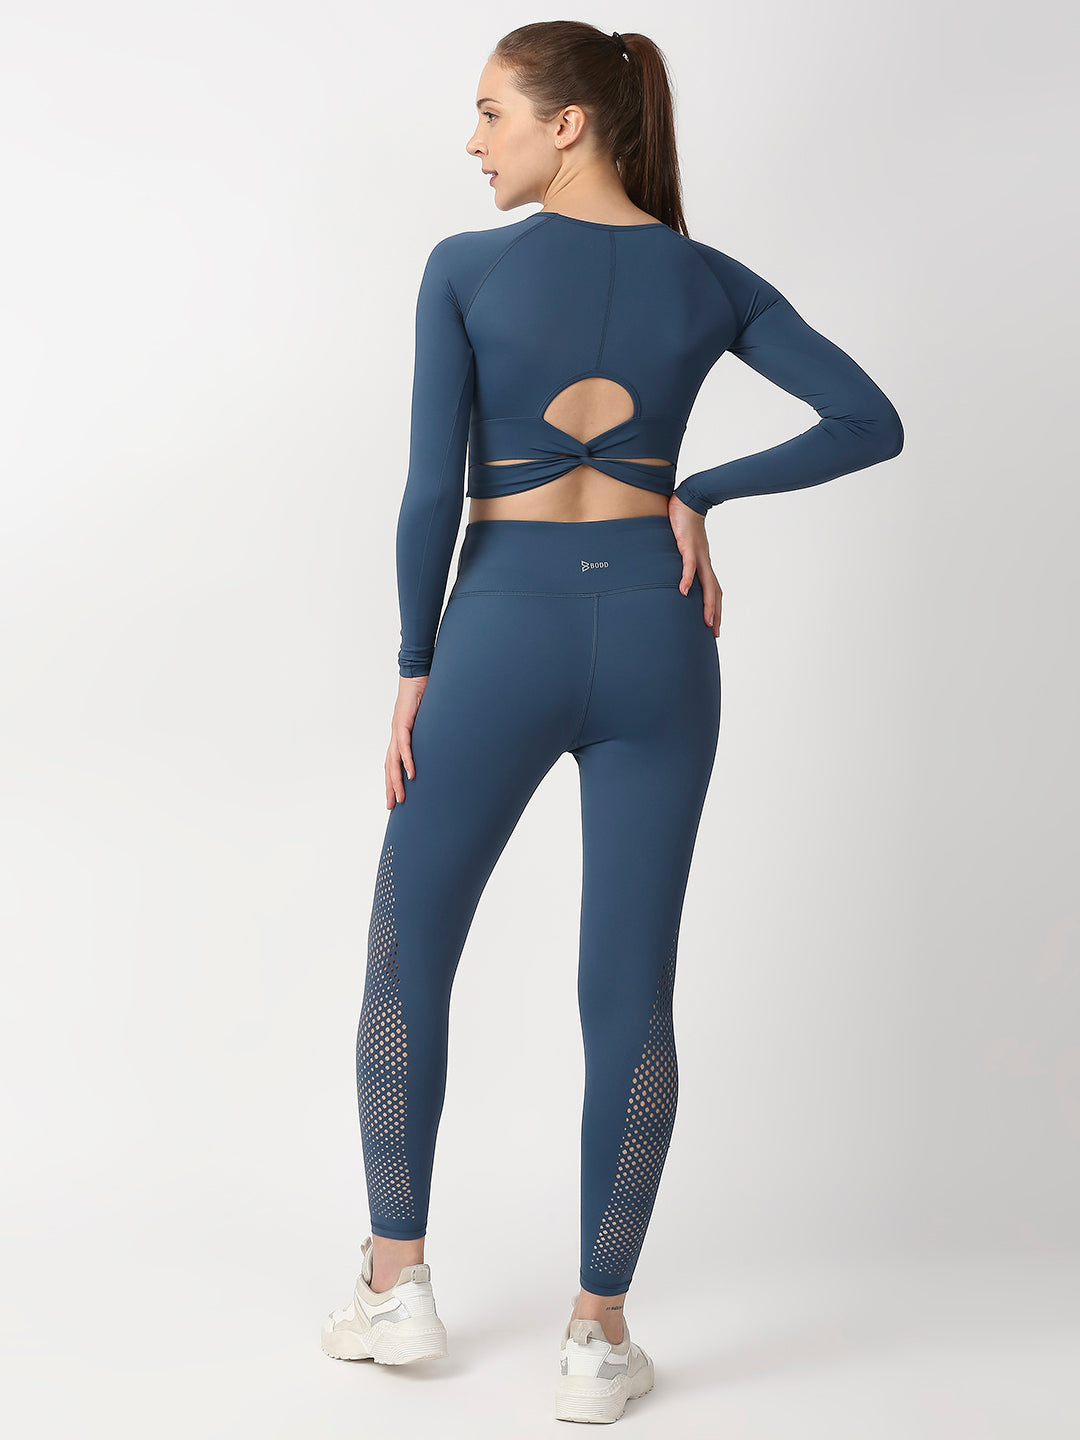 Crystal Teal Cut Out Leggings boddactive.com